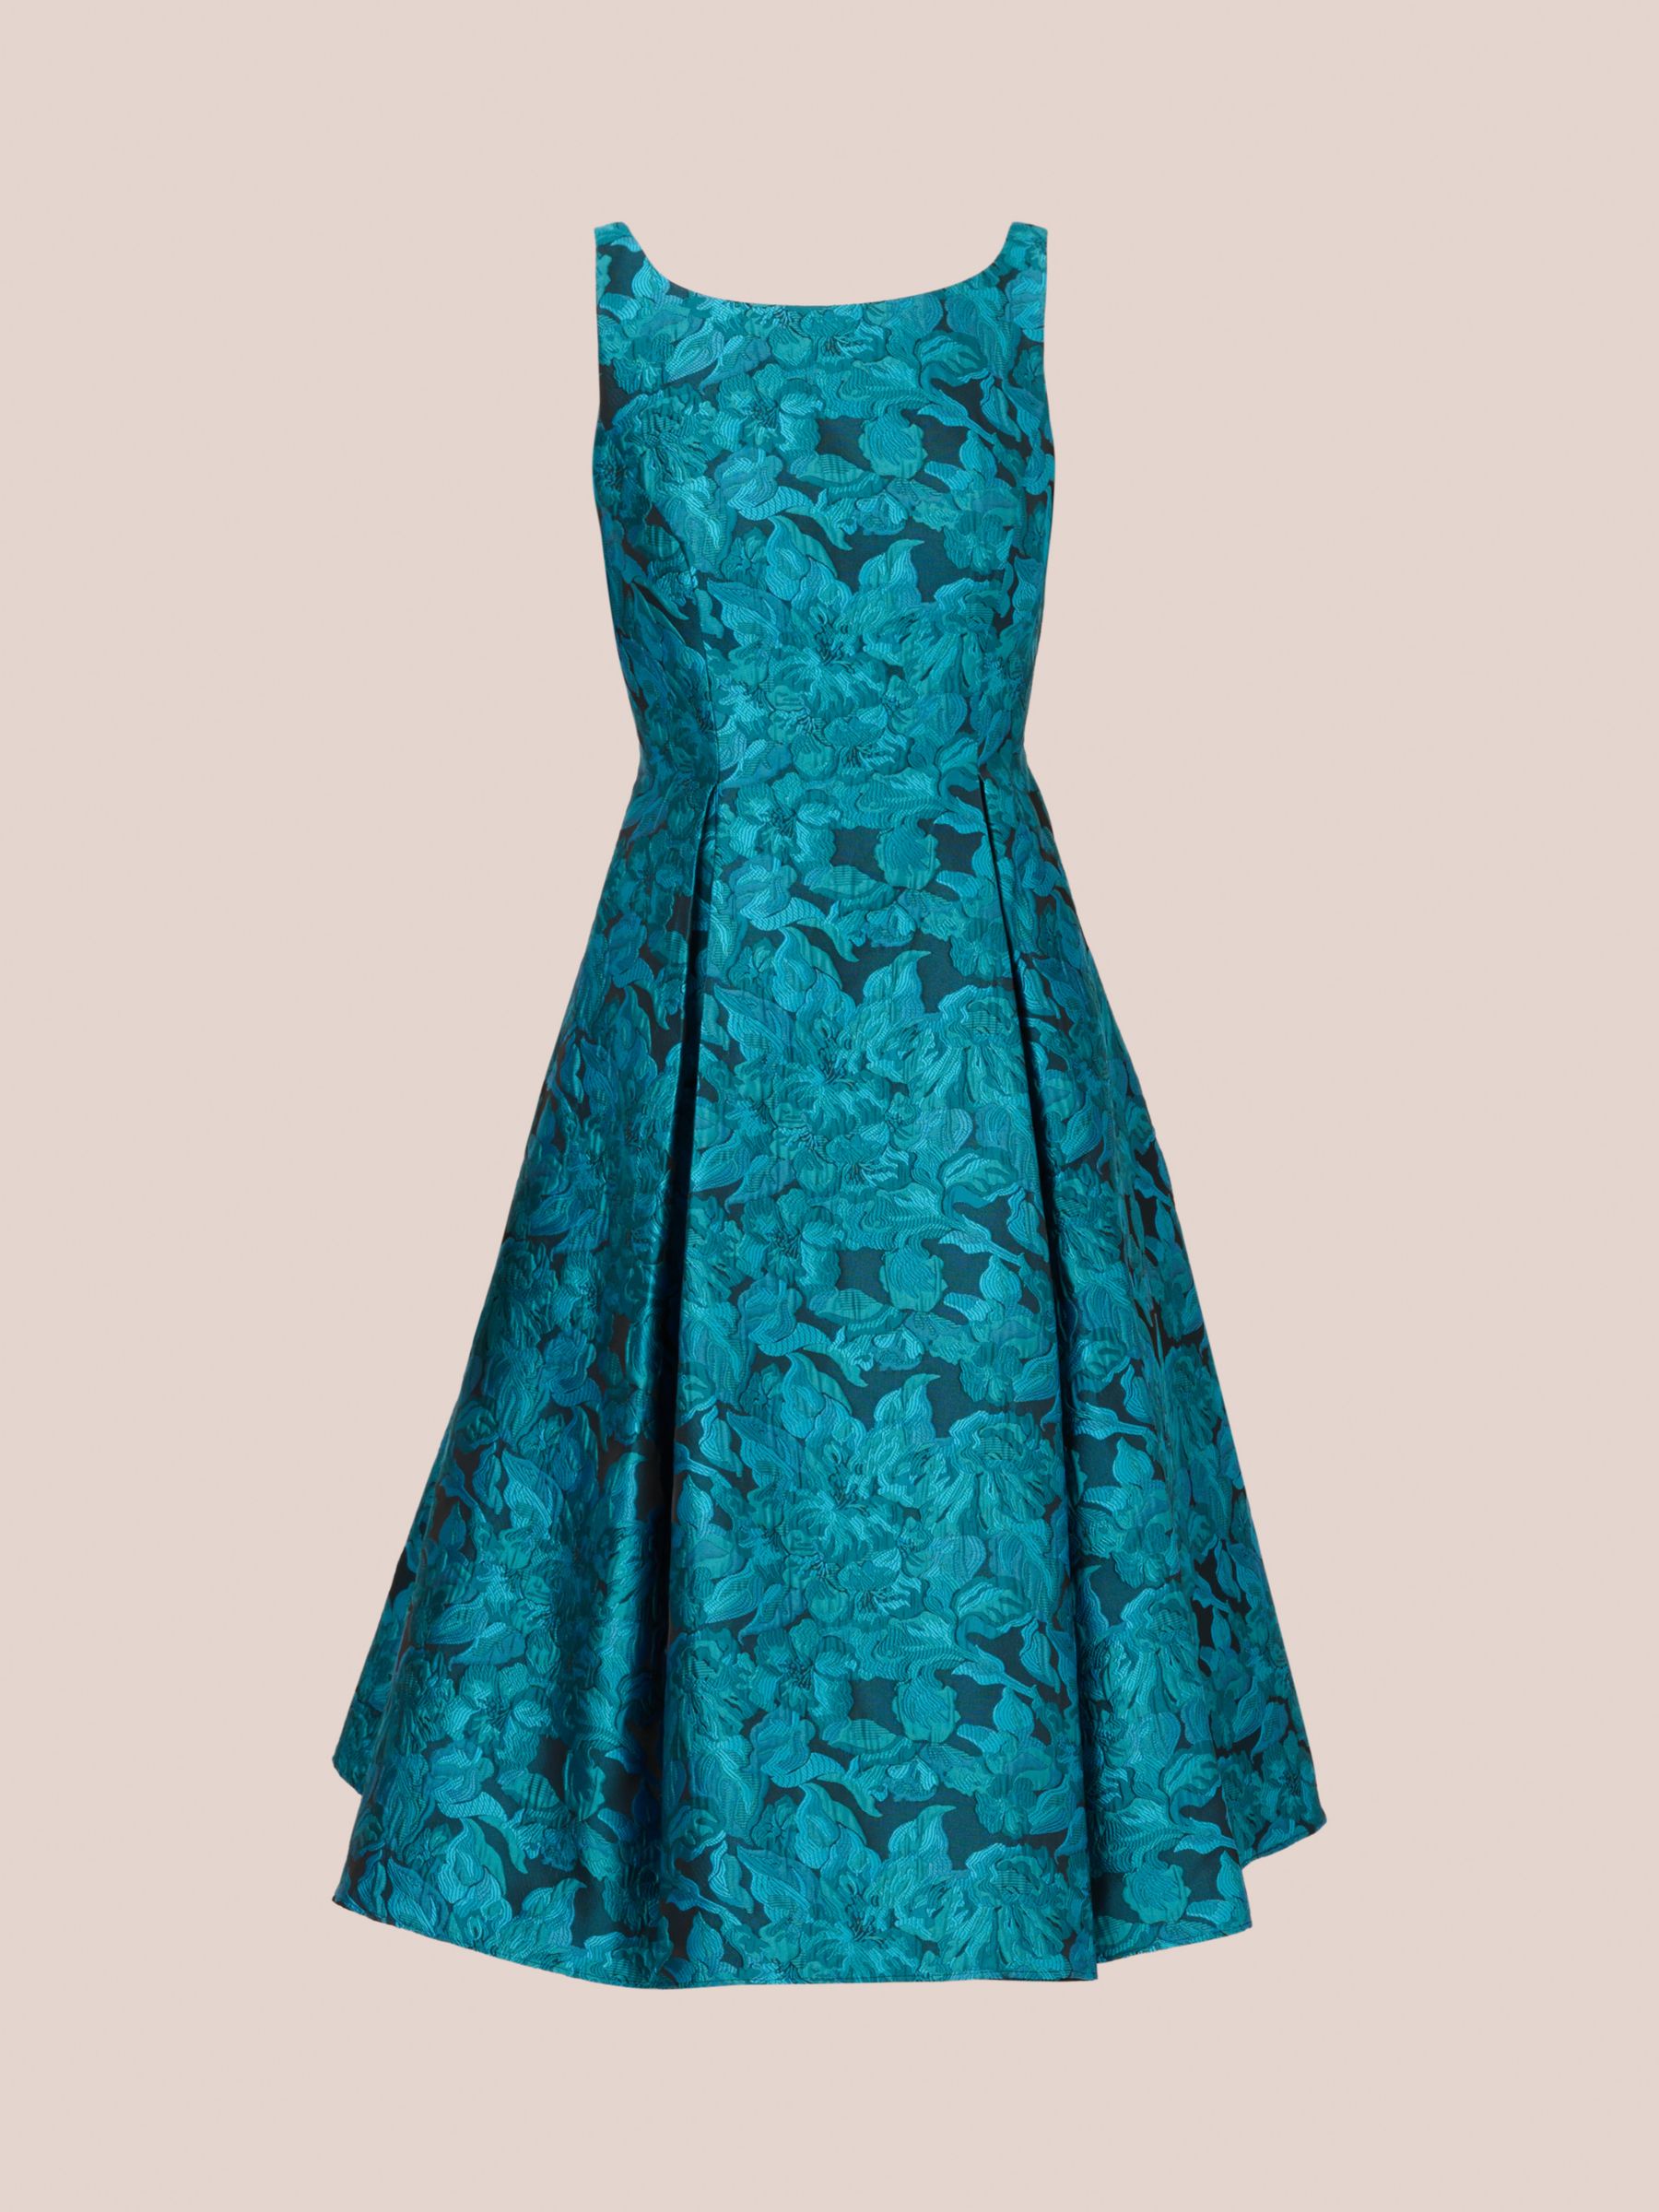 Adrianna Papell Floral Jacquard Flared Dress, Blue, 6